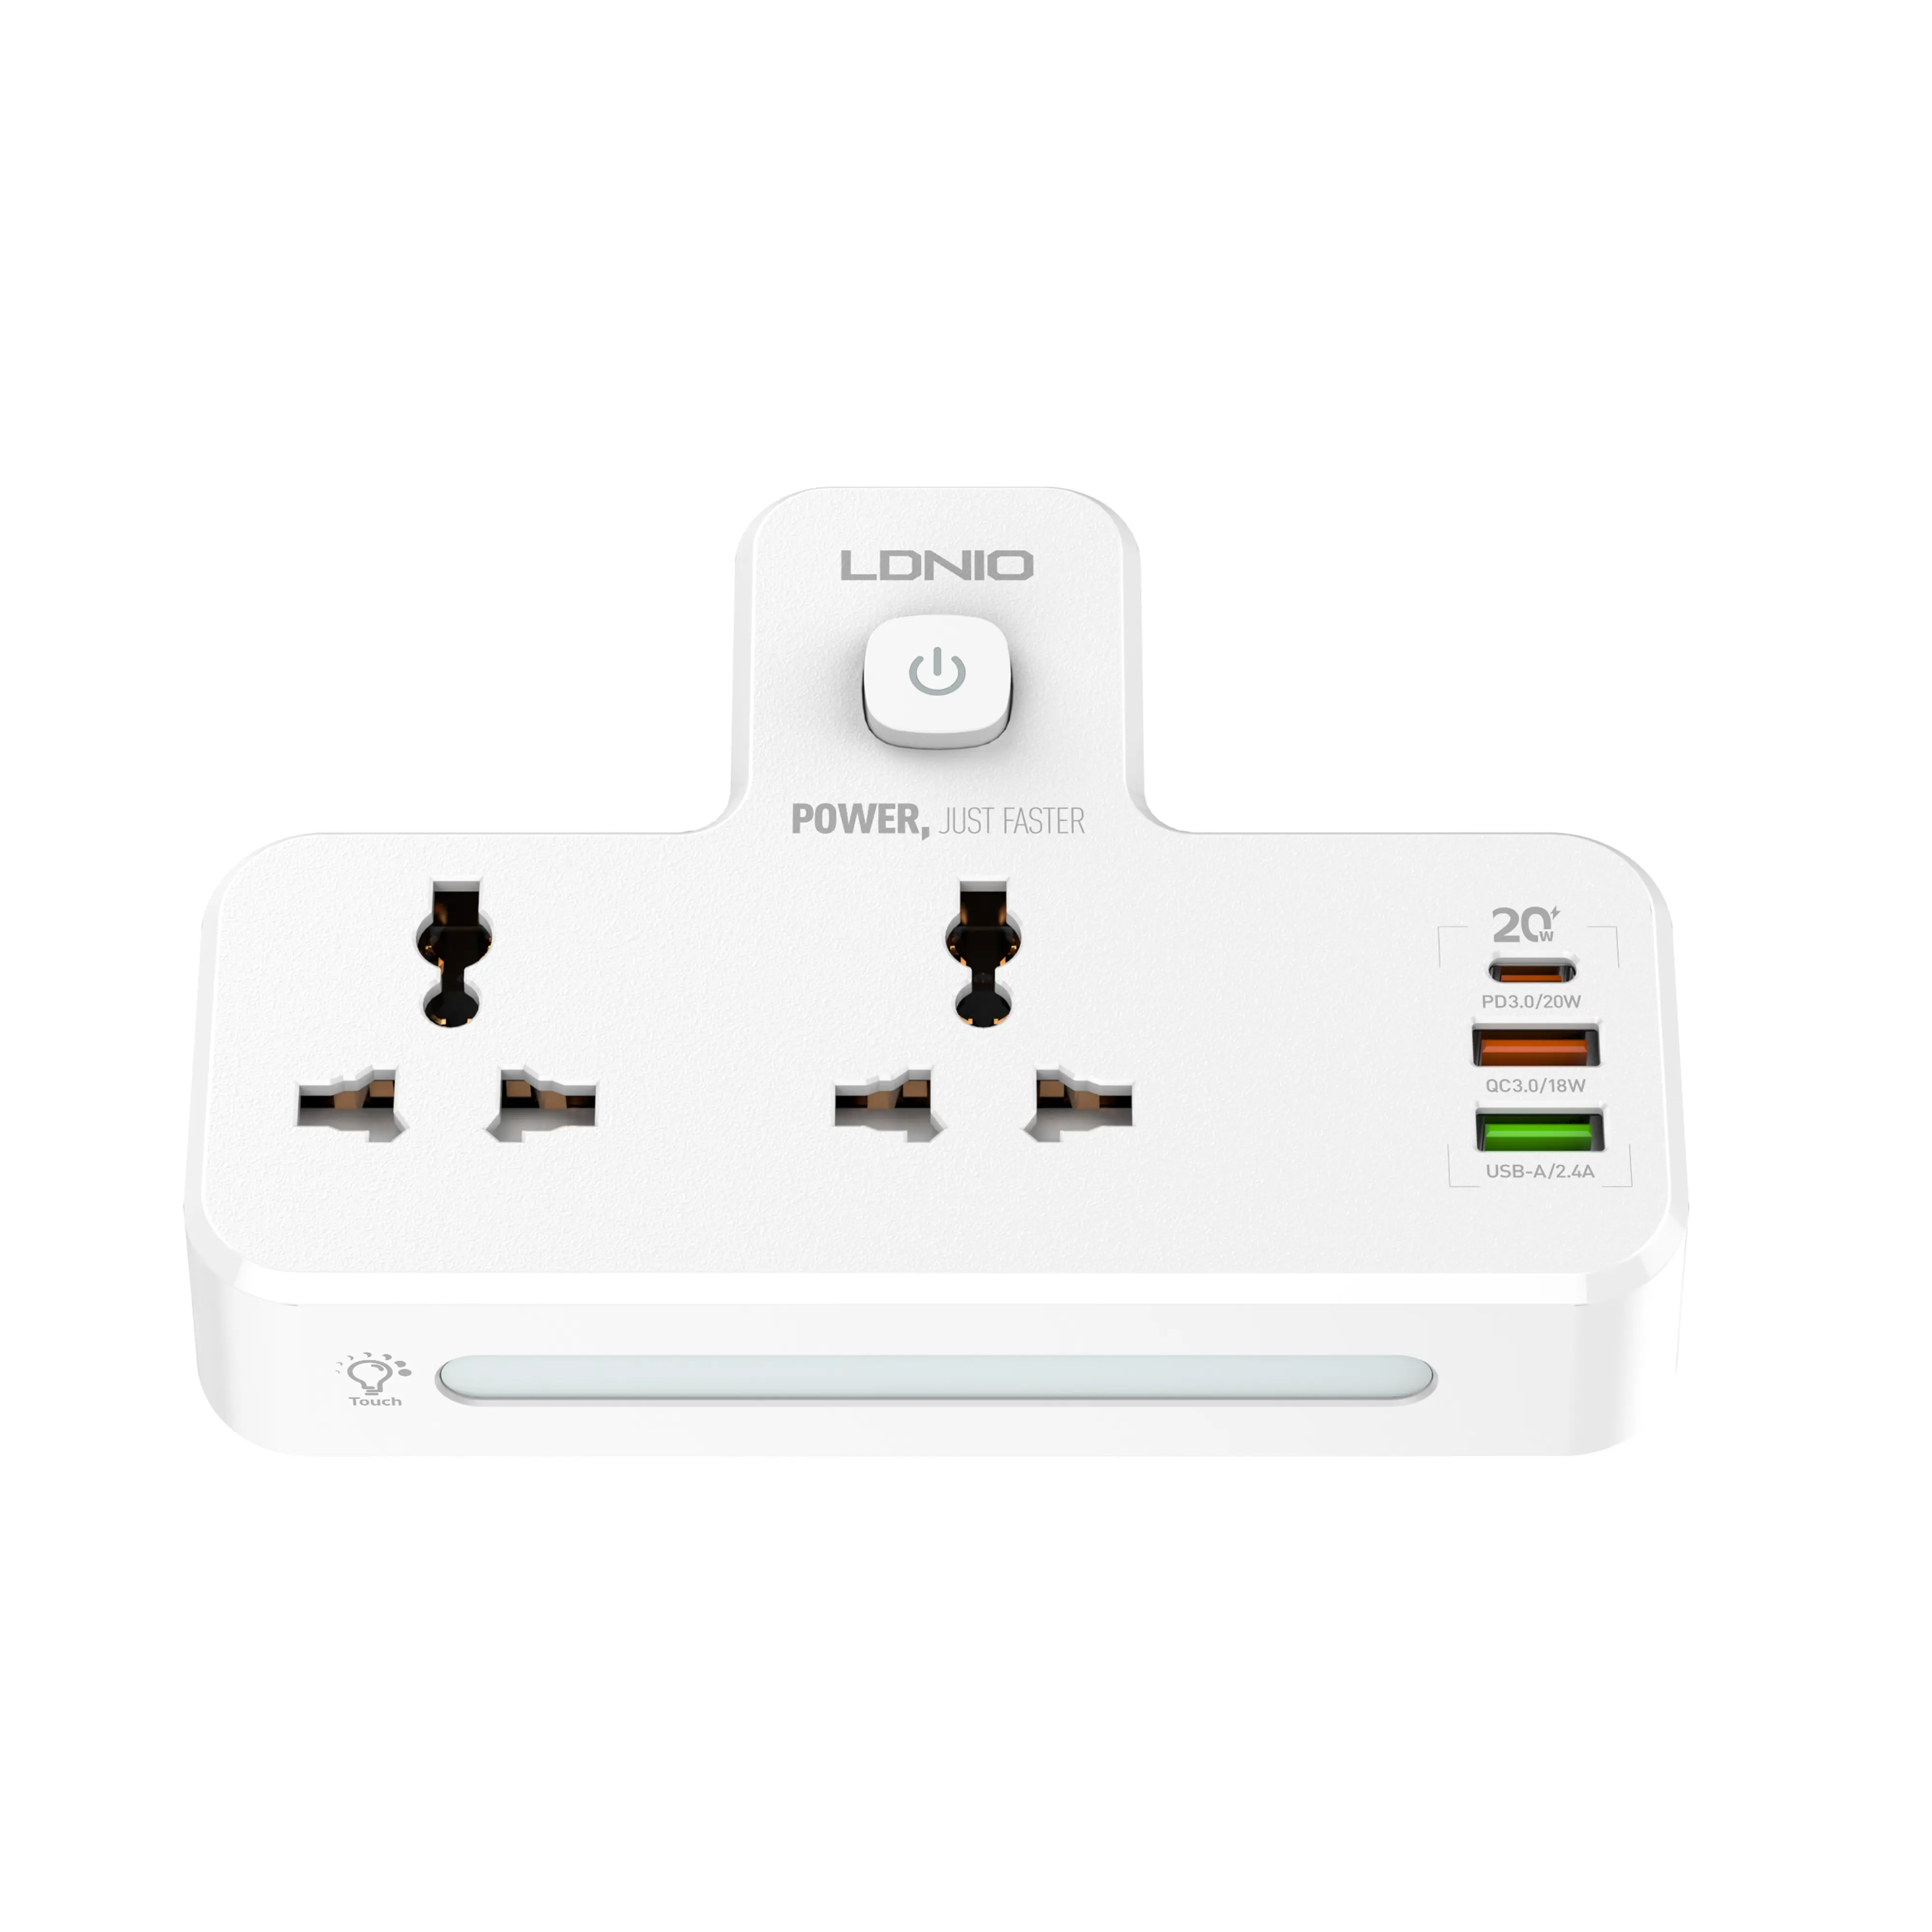 LDNIO SC2311 LED Lamp Power Socket with 2 Universal Outlets 3 USB Ports 20W PD Fast Charging Power Strip